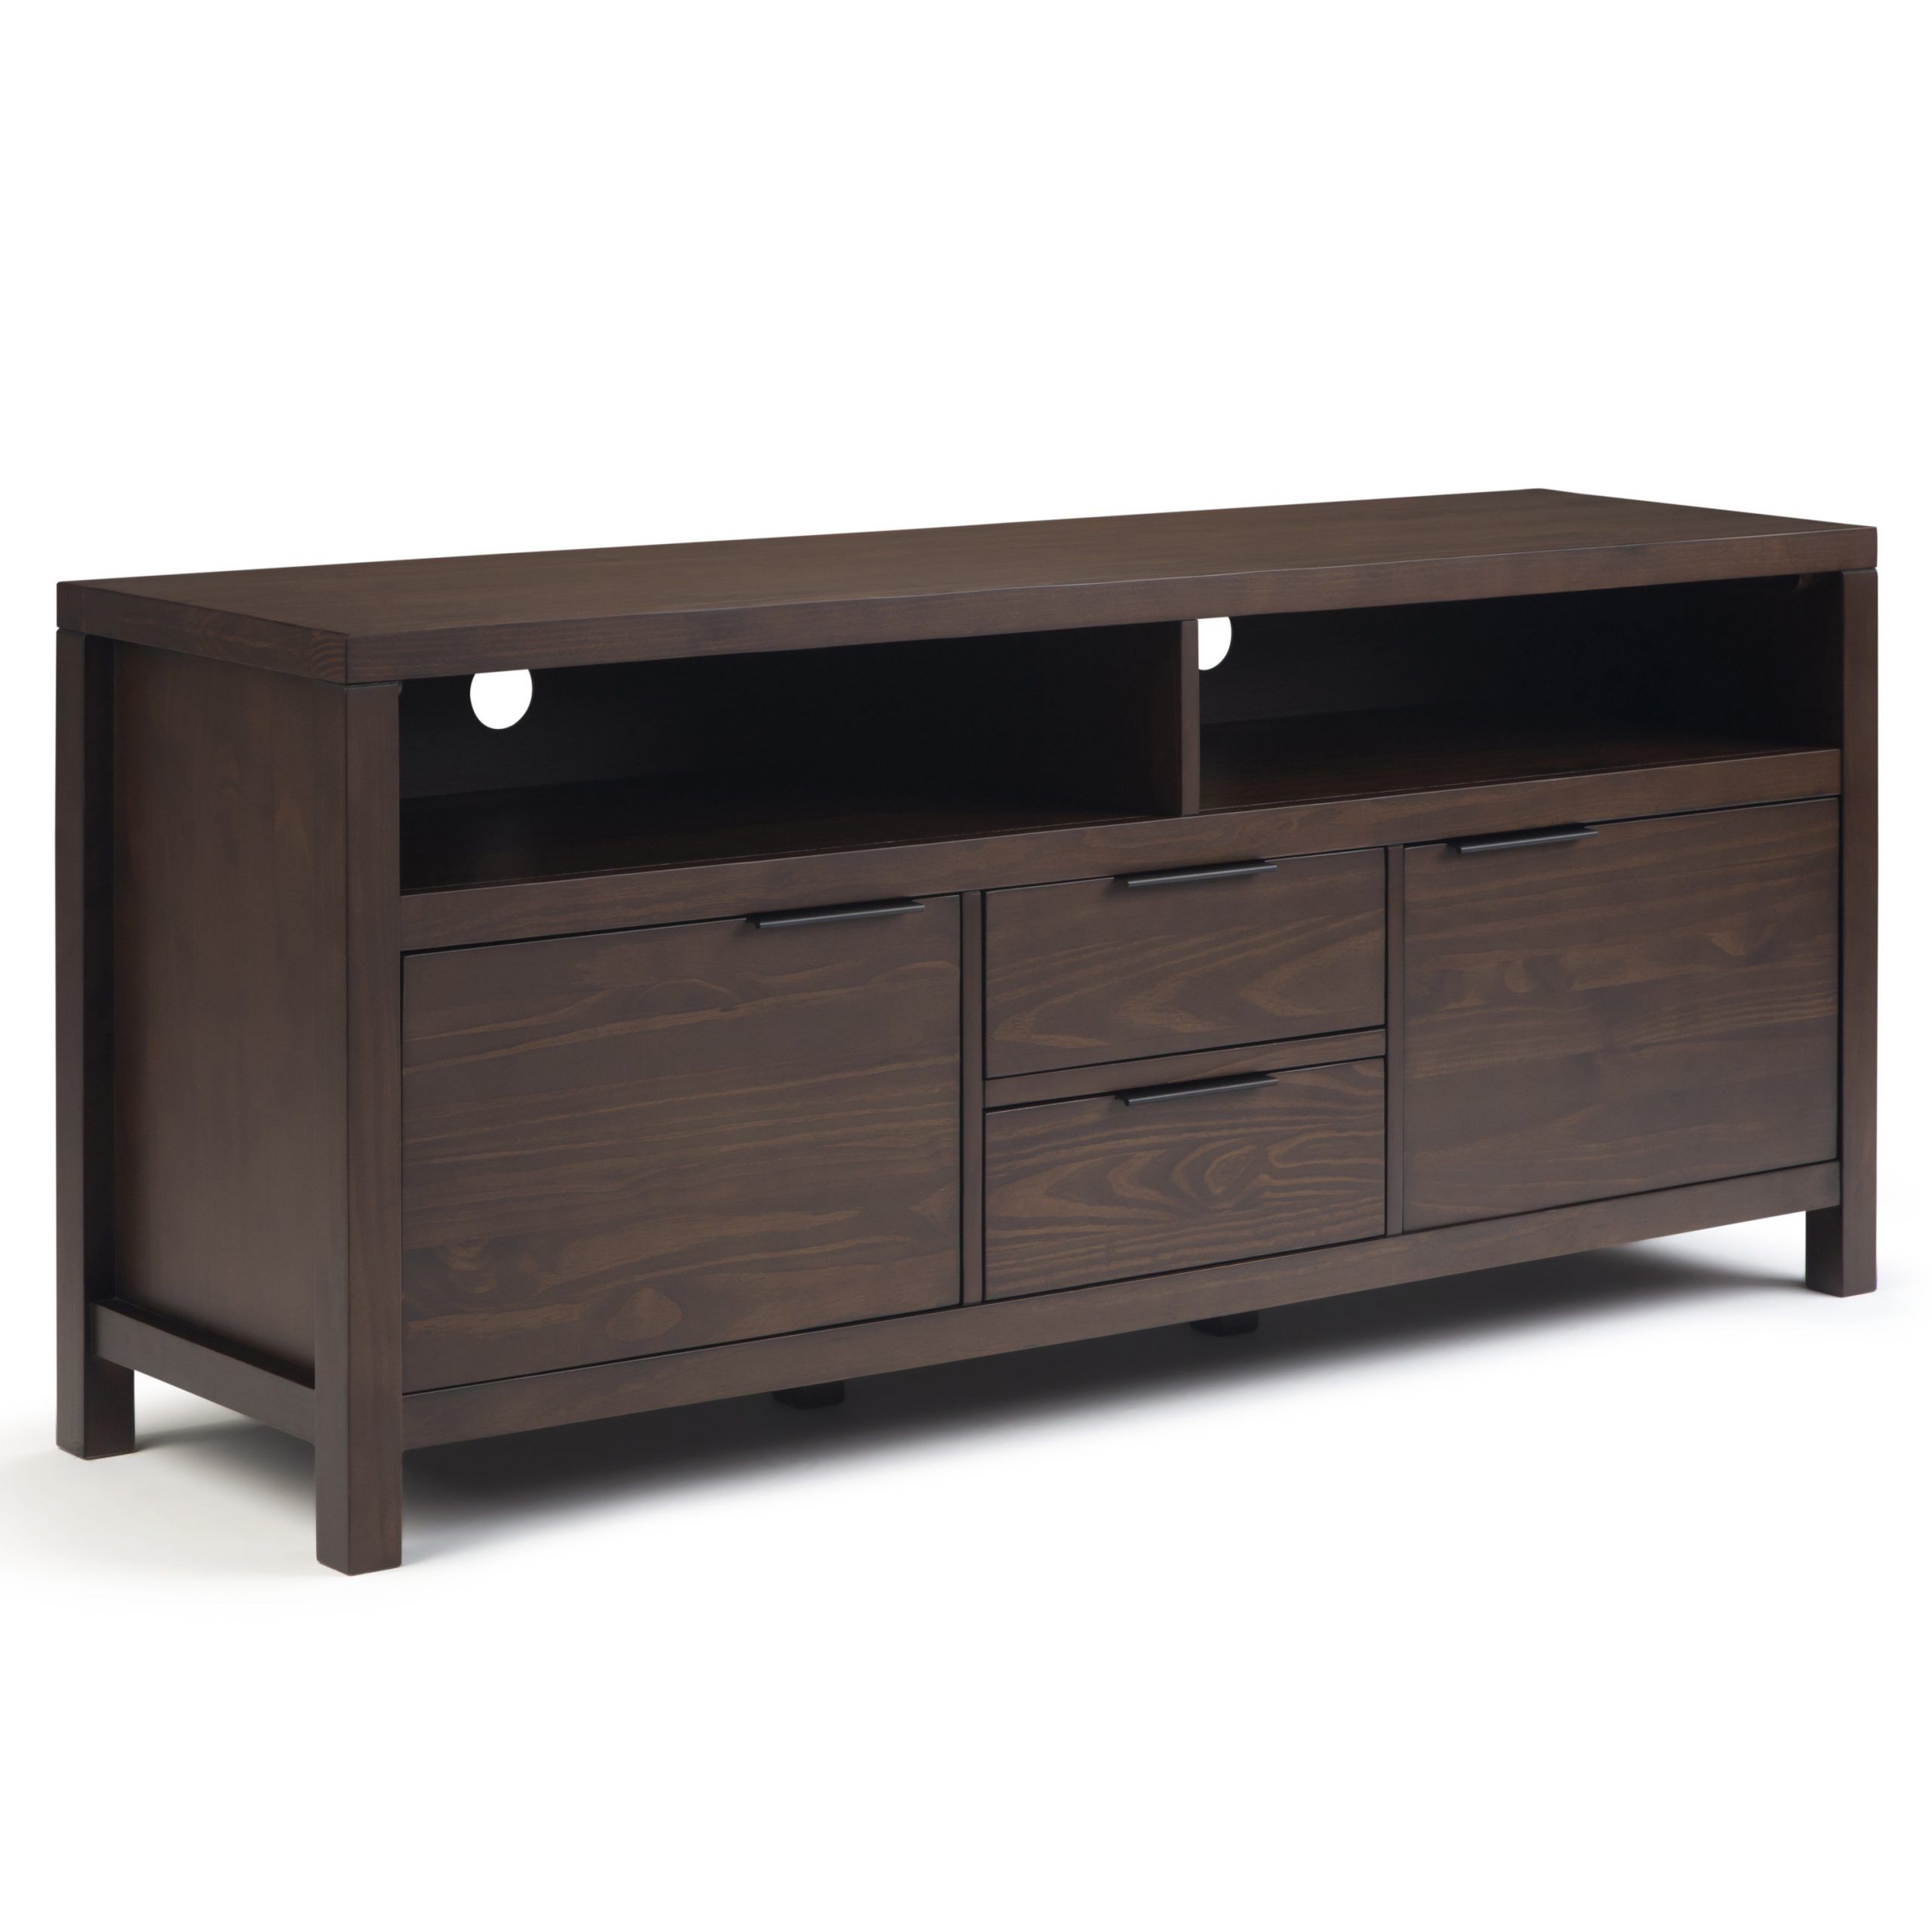 Evanston Tv Stands For Tvs Up To 60" Inside Current Brooklyn + Max Auster Solid Wood 60 Inch Wide Contemporary (View 15 of 20)